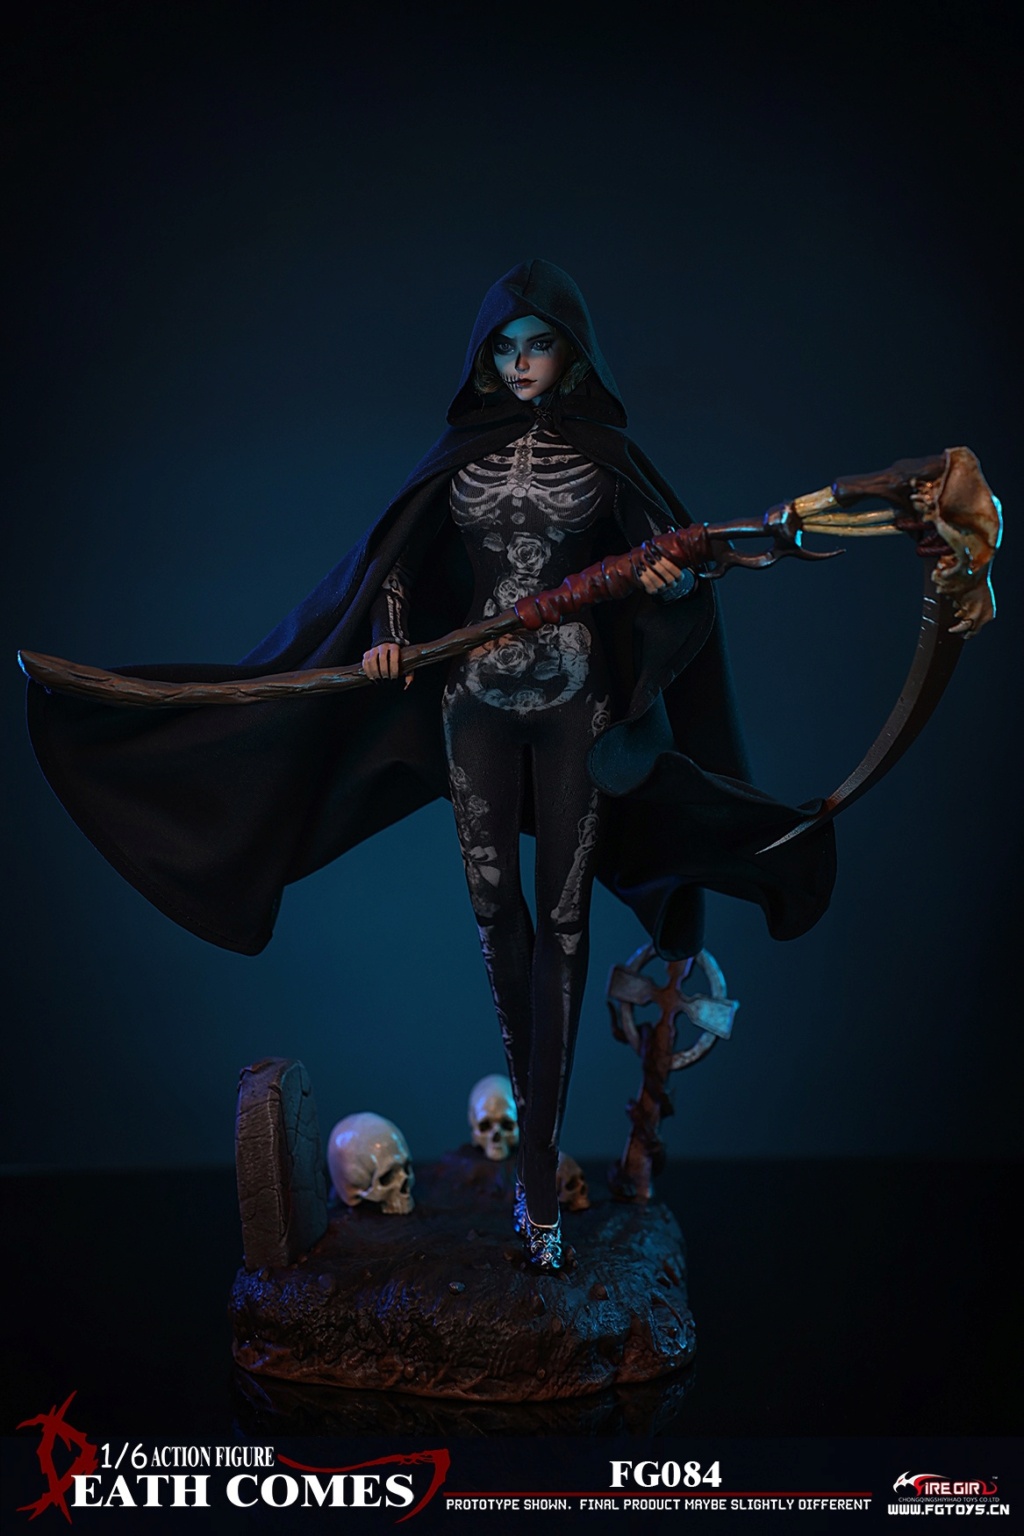 Female - NEW PRODUCT: Fire Girl Toys: 1/6 Death Comes #FG084 female 18101013